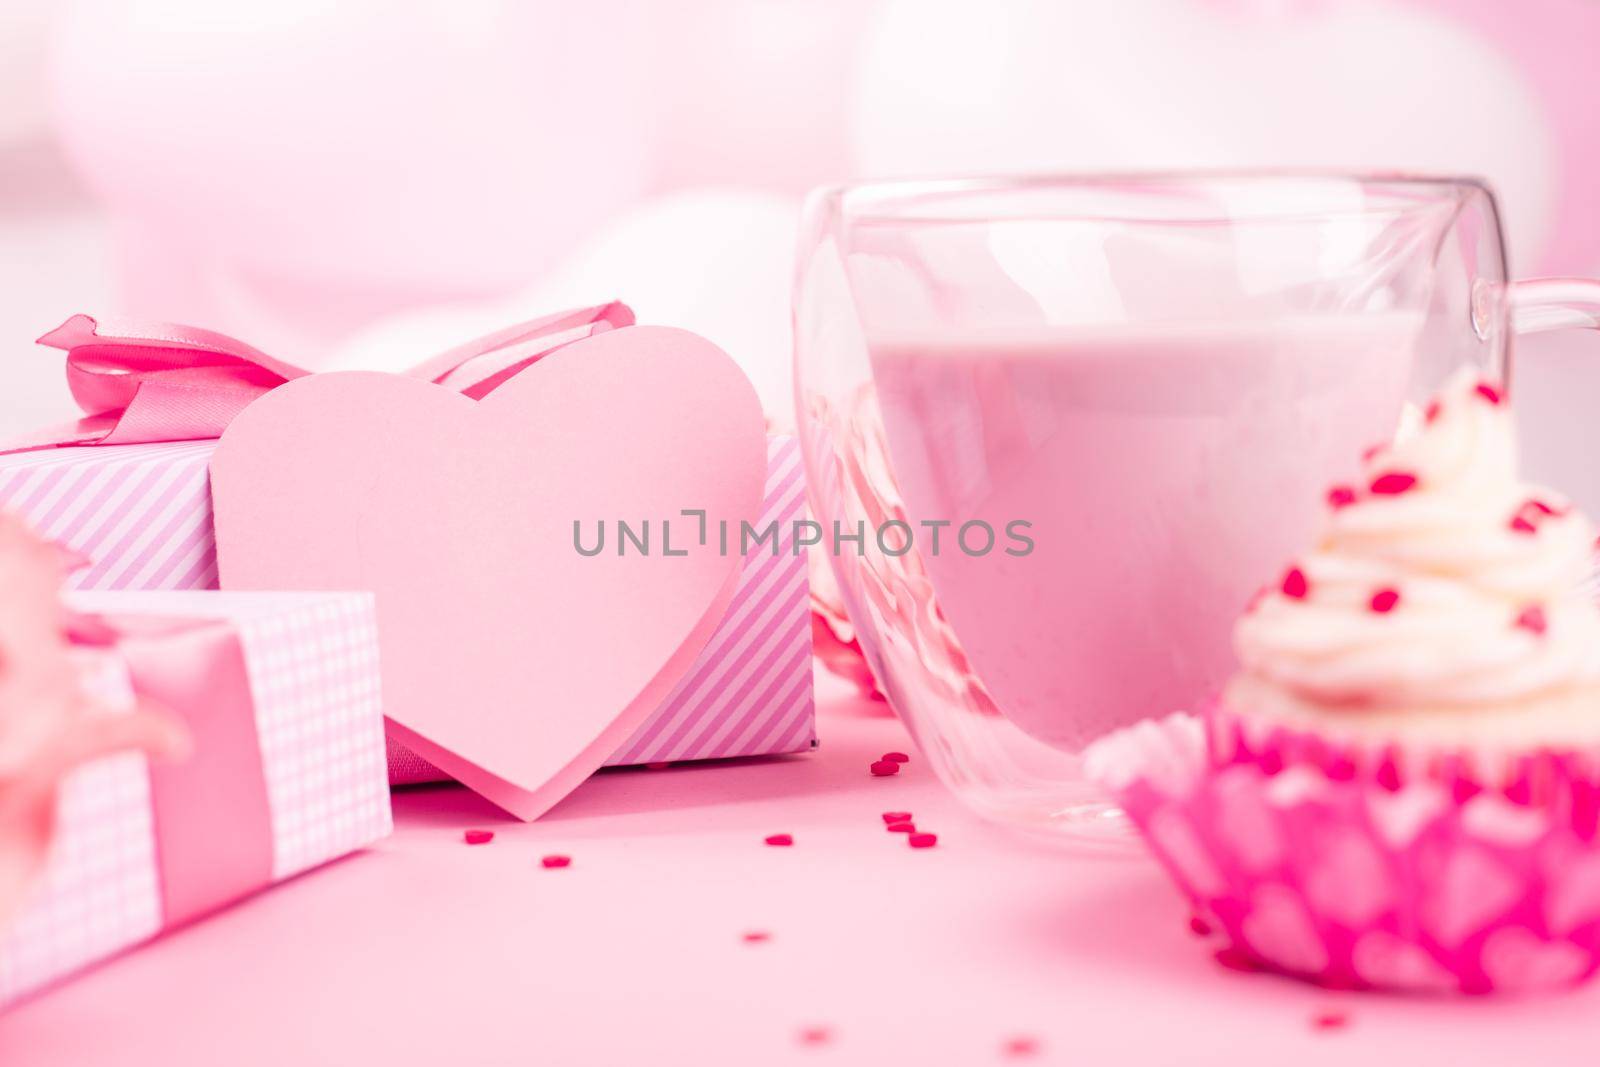 Valentine Day gift in a box wrapped in striped paper and tied with silk ribbon bow and dessert on pink balloons background with copy space for text